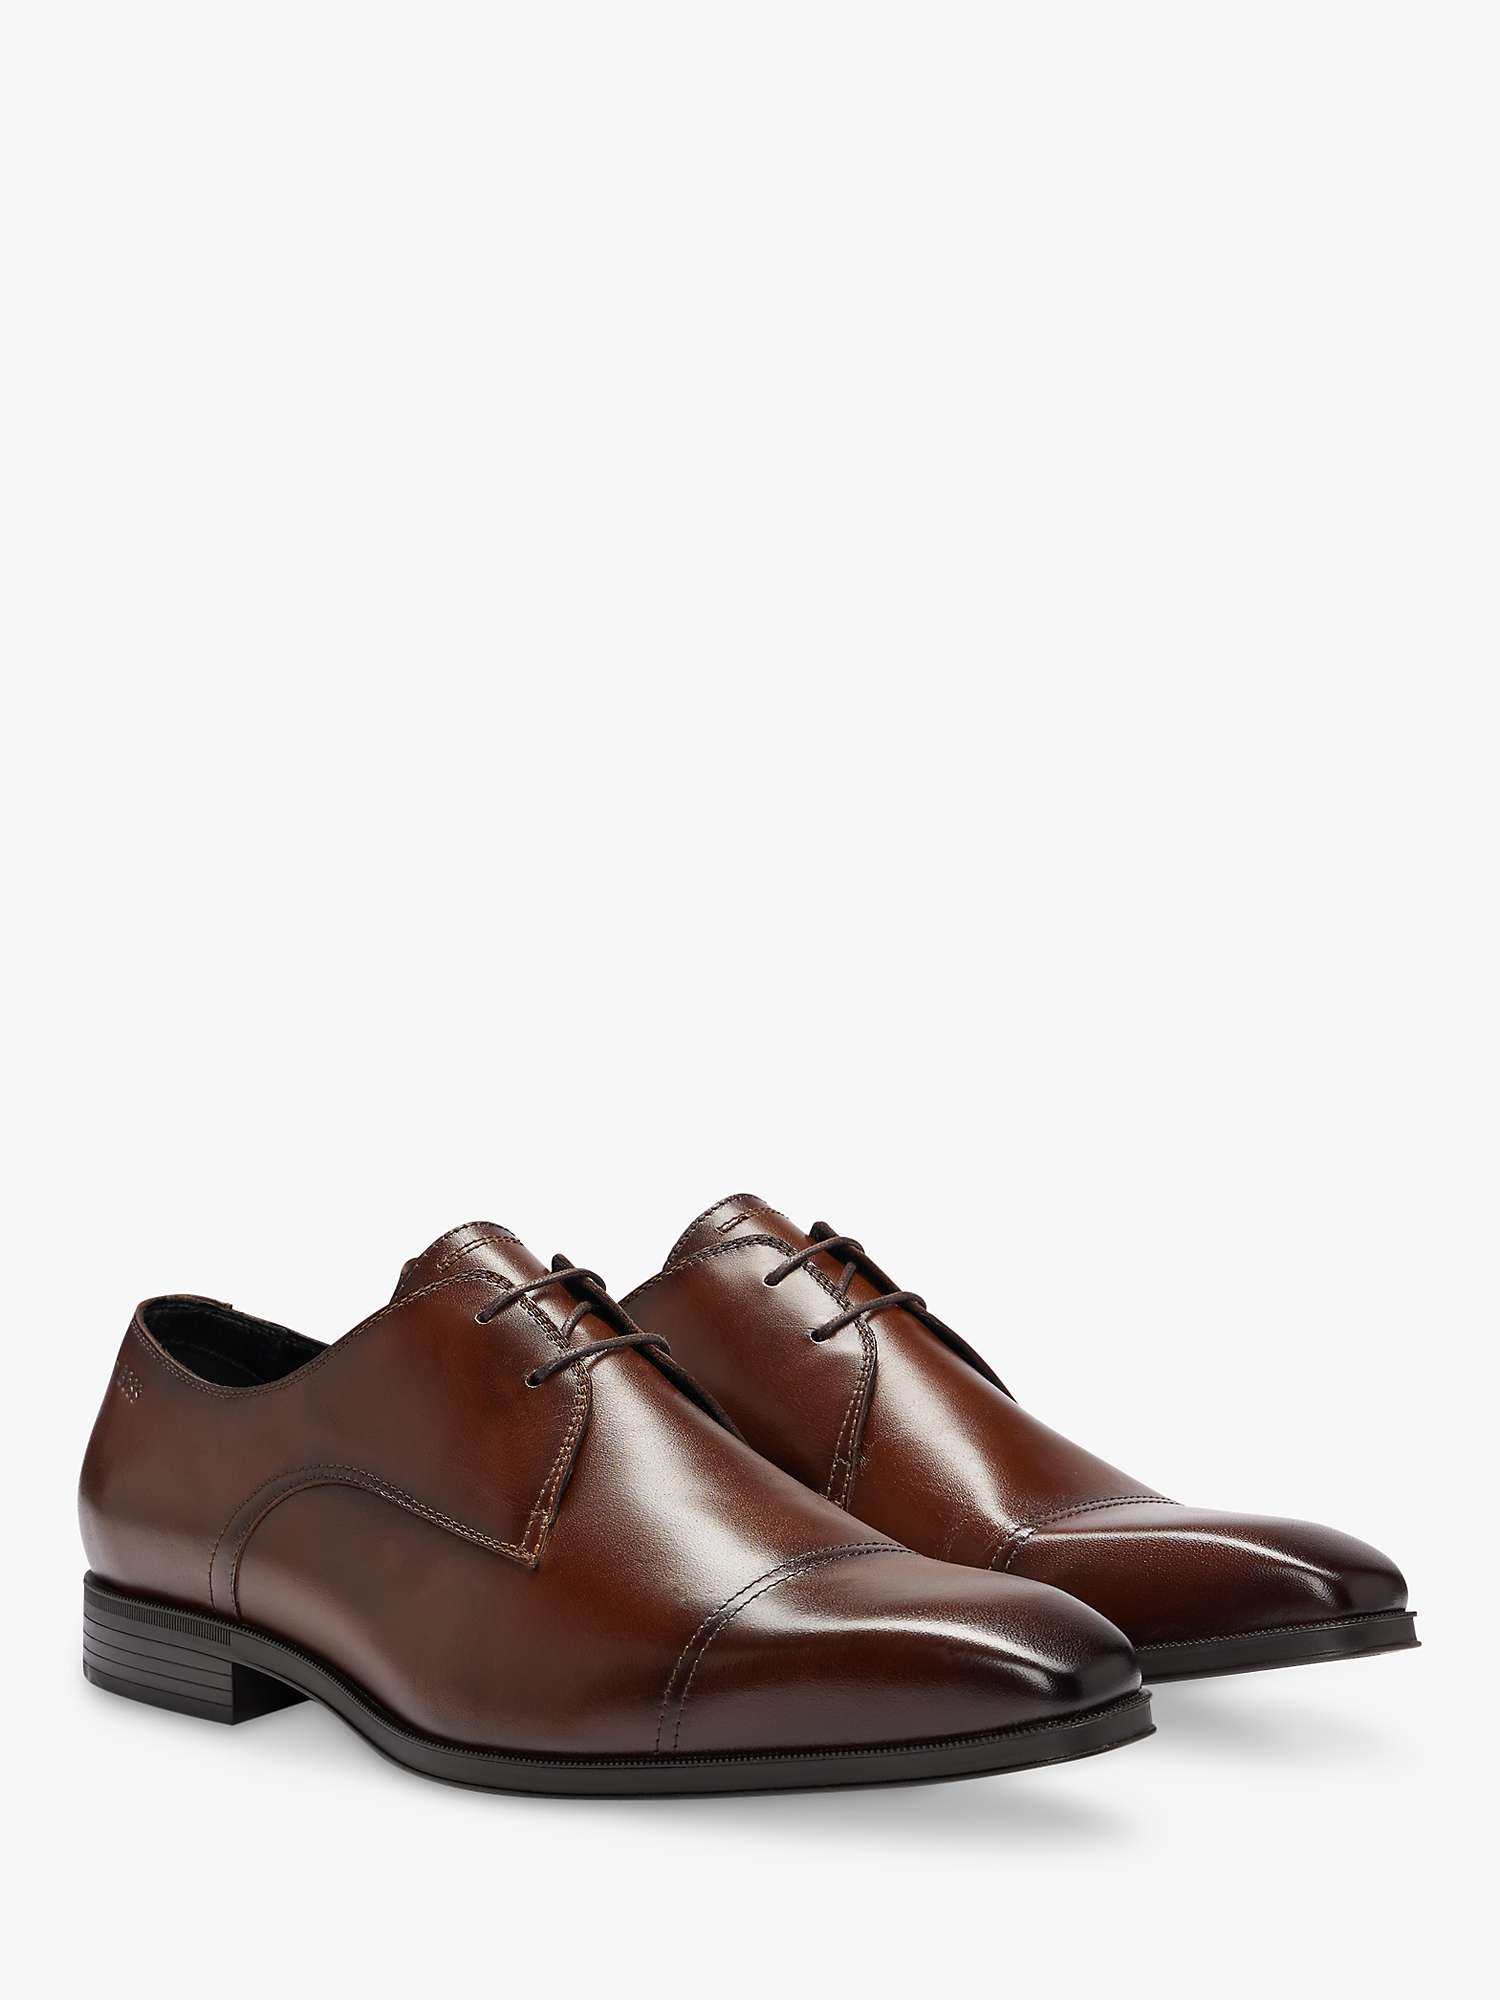 Buy BOSS Theon Derby Shoes Online at johnlewis.com